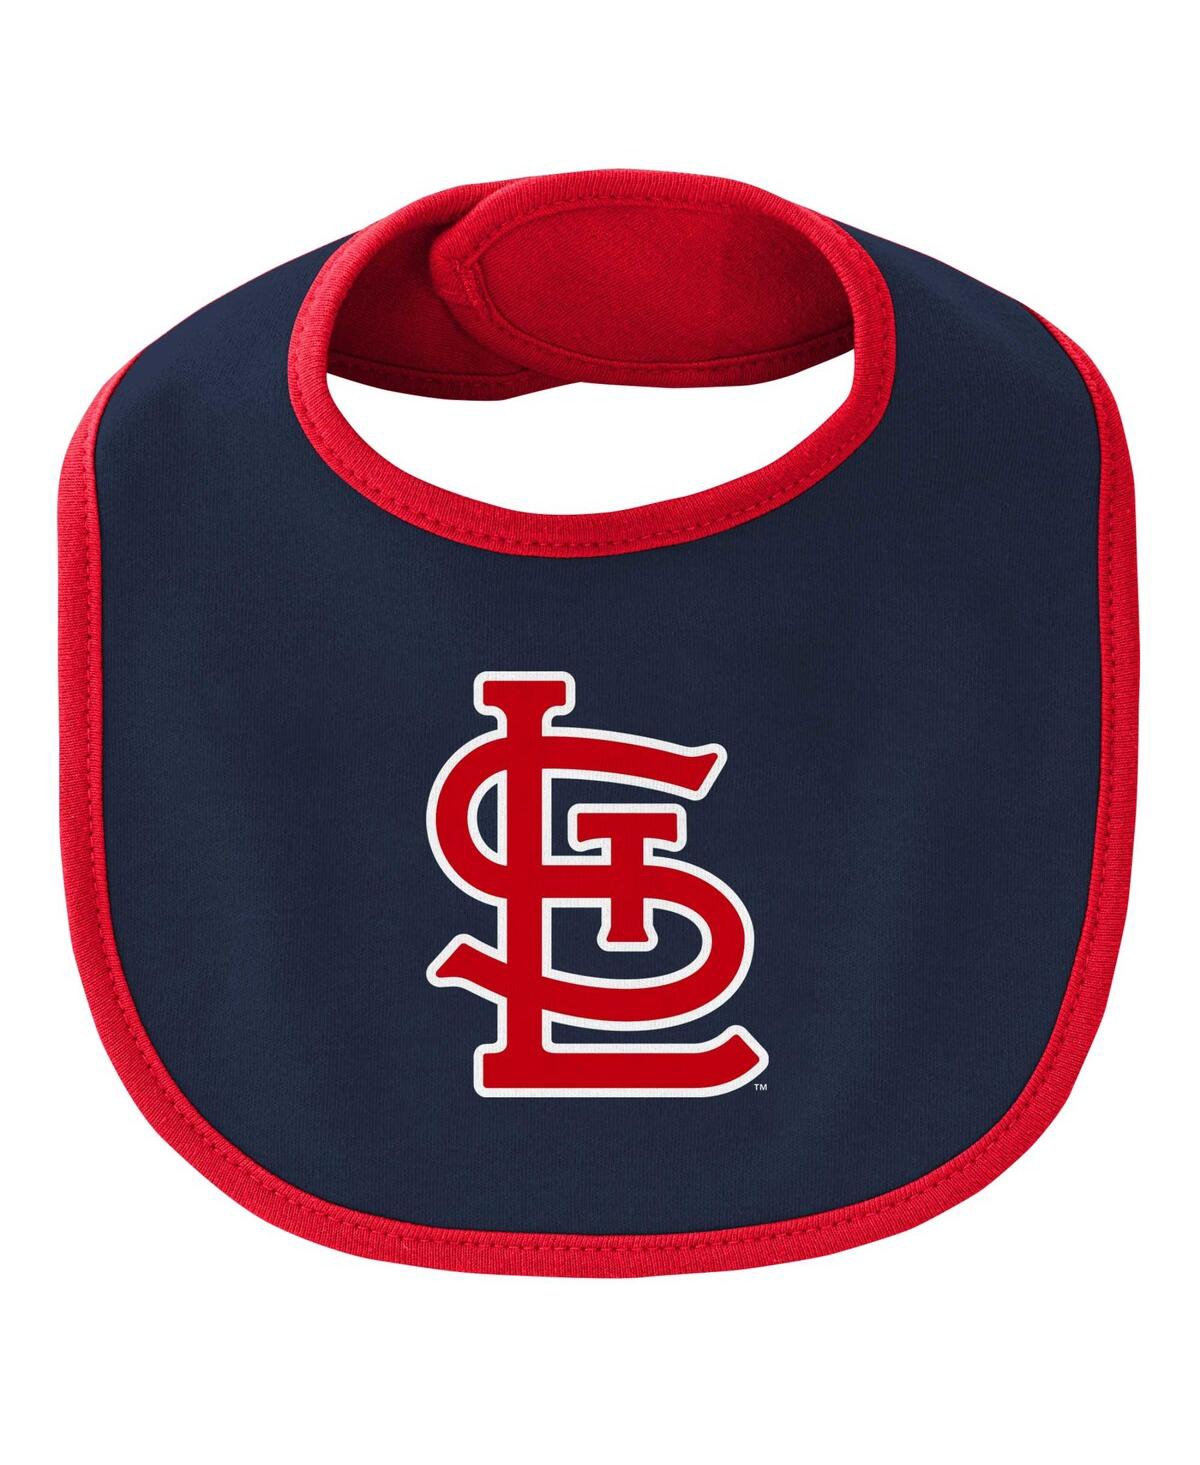 Shop Outerstuff Newborn And Infant Boys And Girls Red, Navy St. Louis Cardinals Little Champ Three-pack Bodysuit Bib In Red,navy